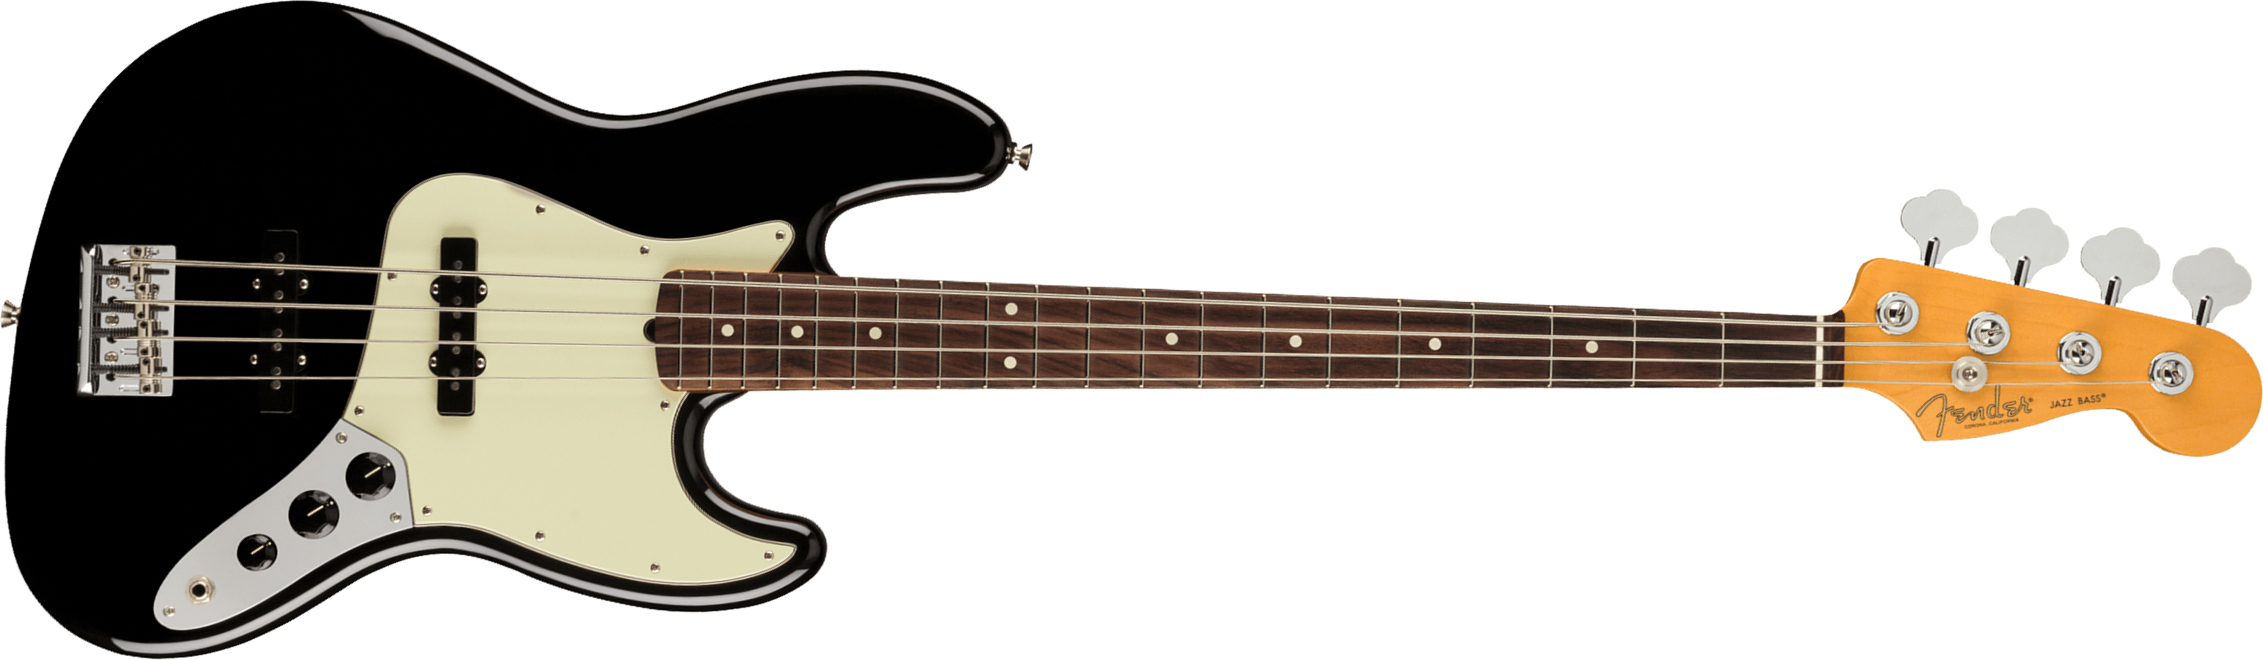 Fender Jazz Bass American Professional Ii Usa Rw - Black - Basse Électrique Solid Body - Main picture